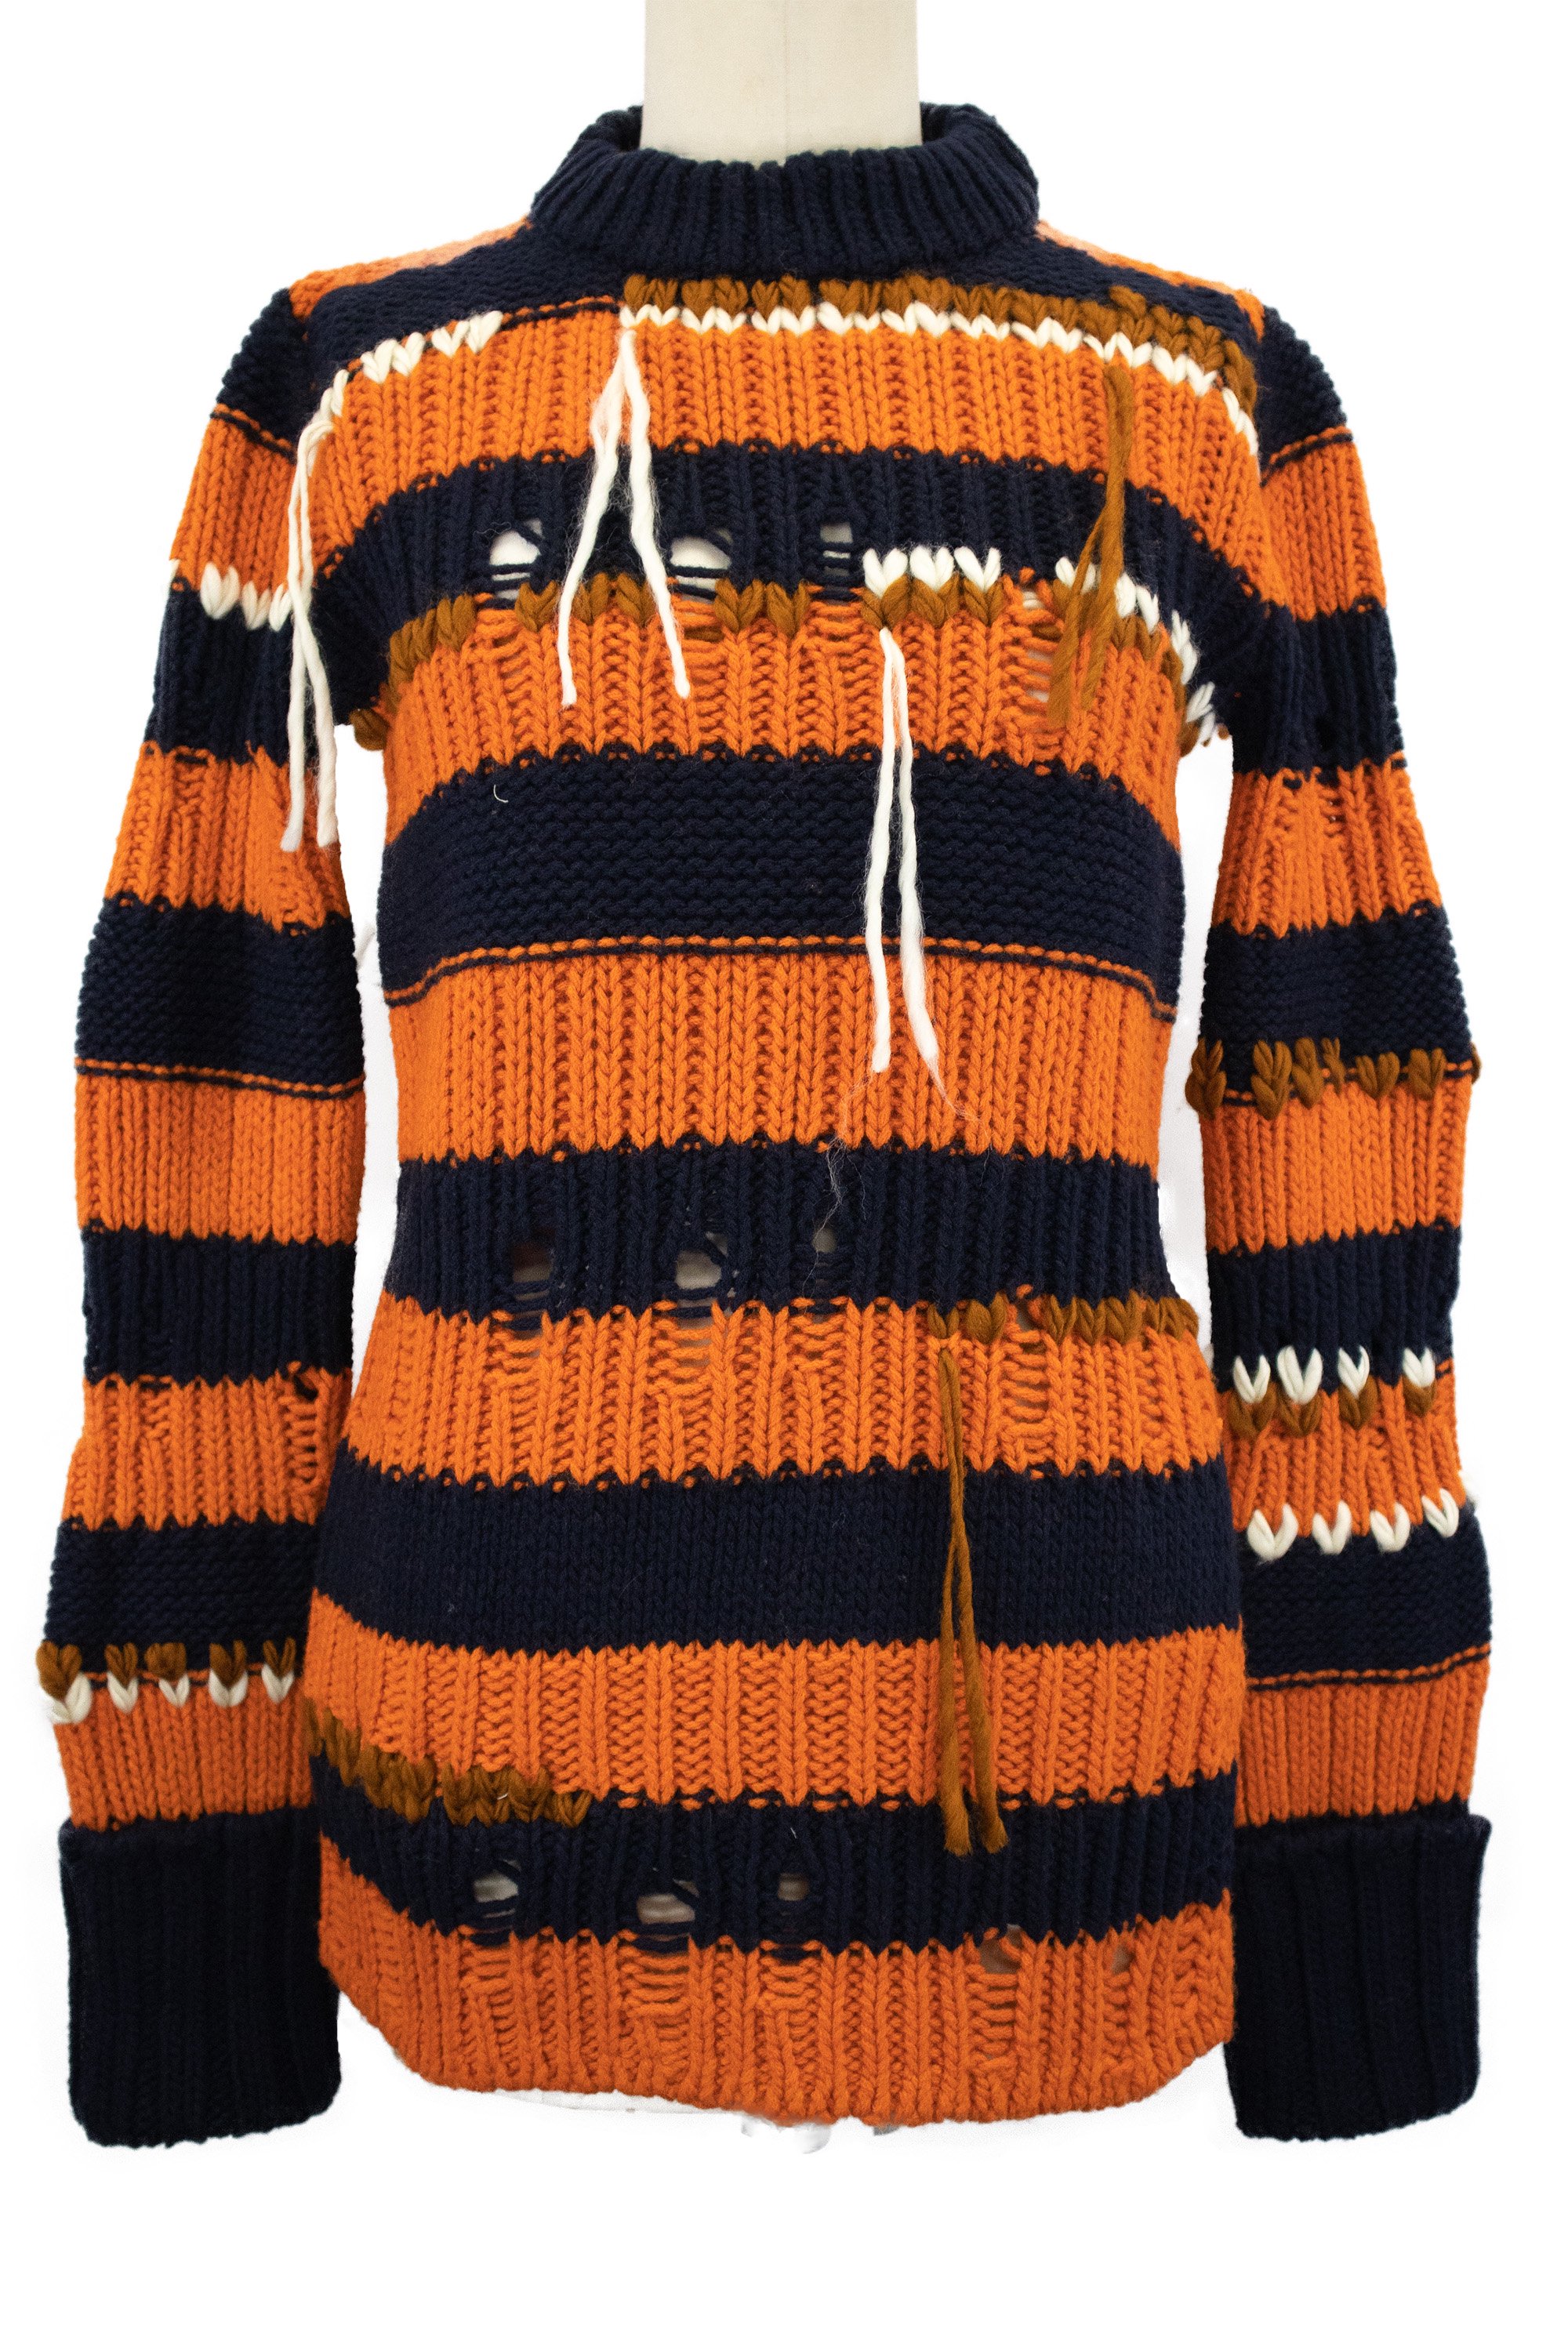 <img class='new_mark_img1' src='https://img.shop-pro.jp/img/new/icons22.gif' style='border:none;display:inline;margin:0px;padding:0px;width:auto;' />【30%OFF】SPORT MAX Hand stitch knit